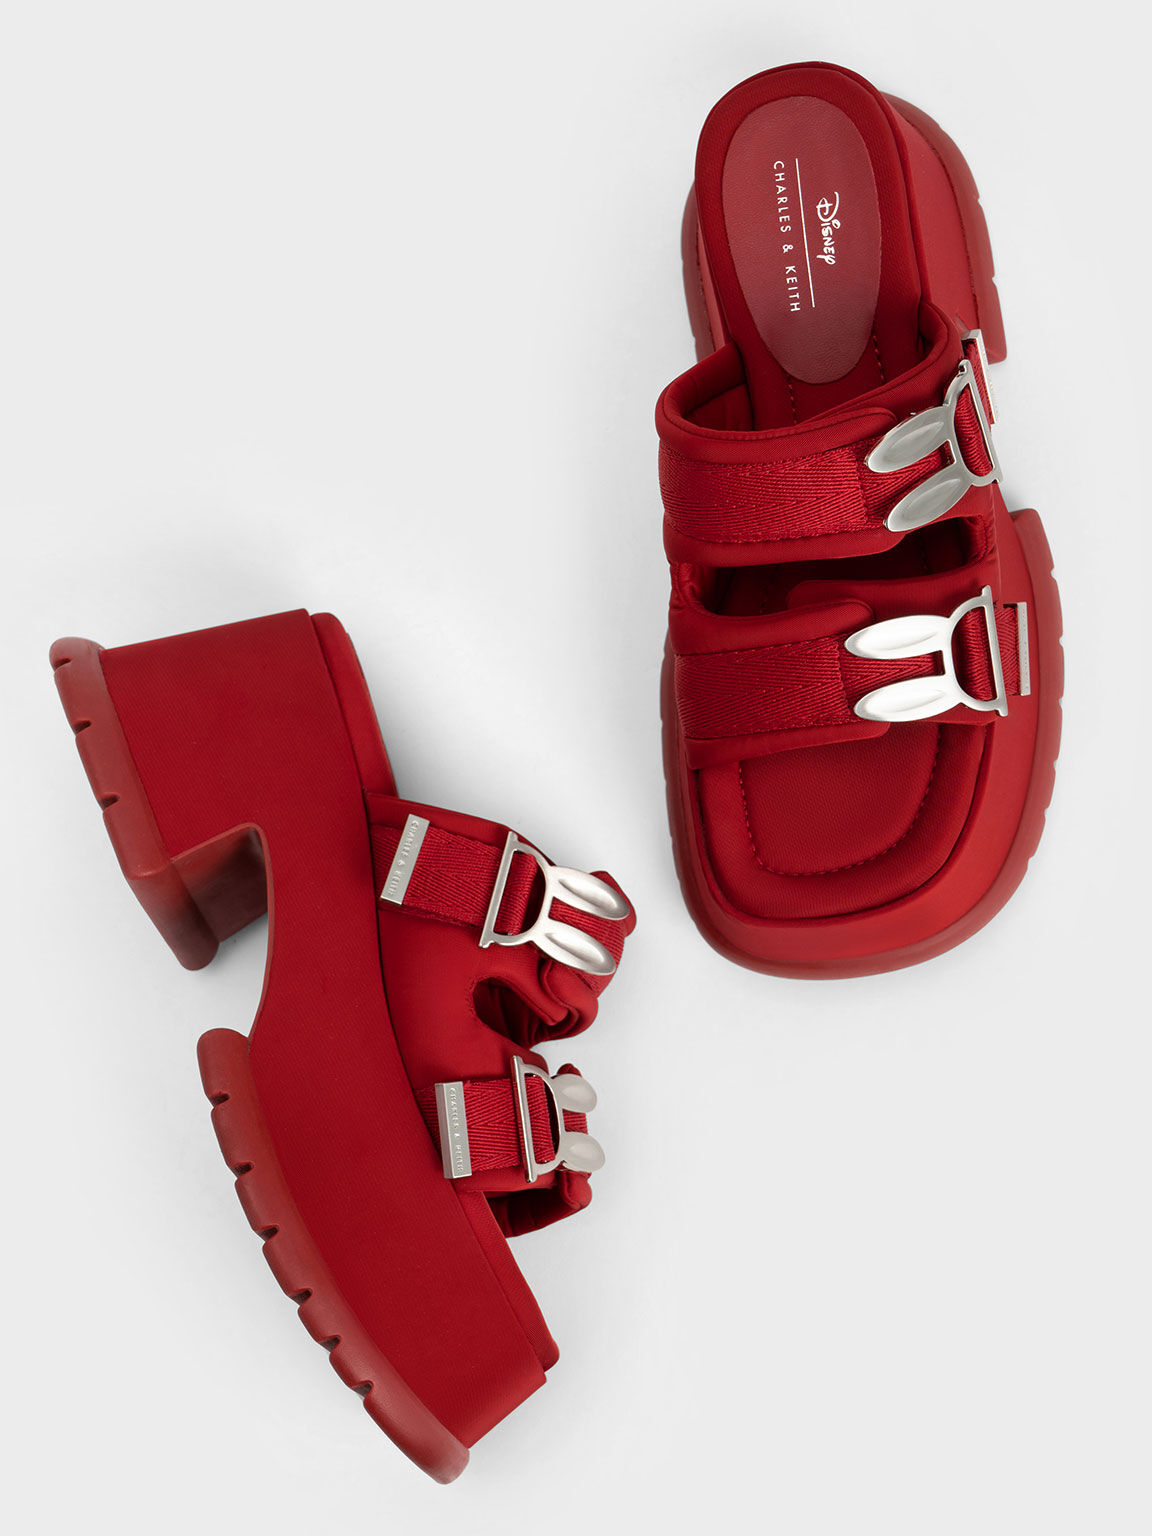 Judy Hopps Metallic Accent Wedge Mules, Red, hi-res